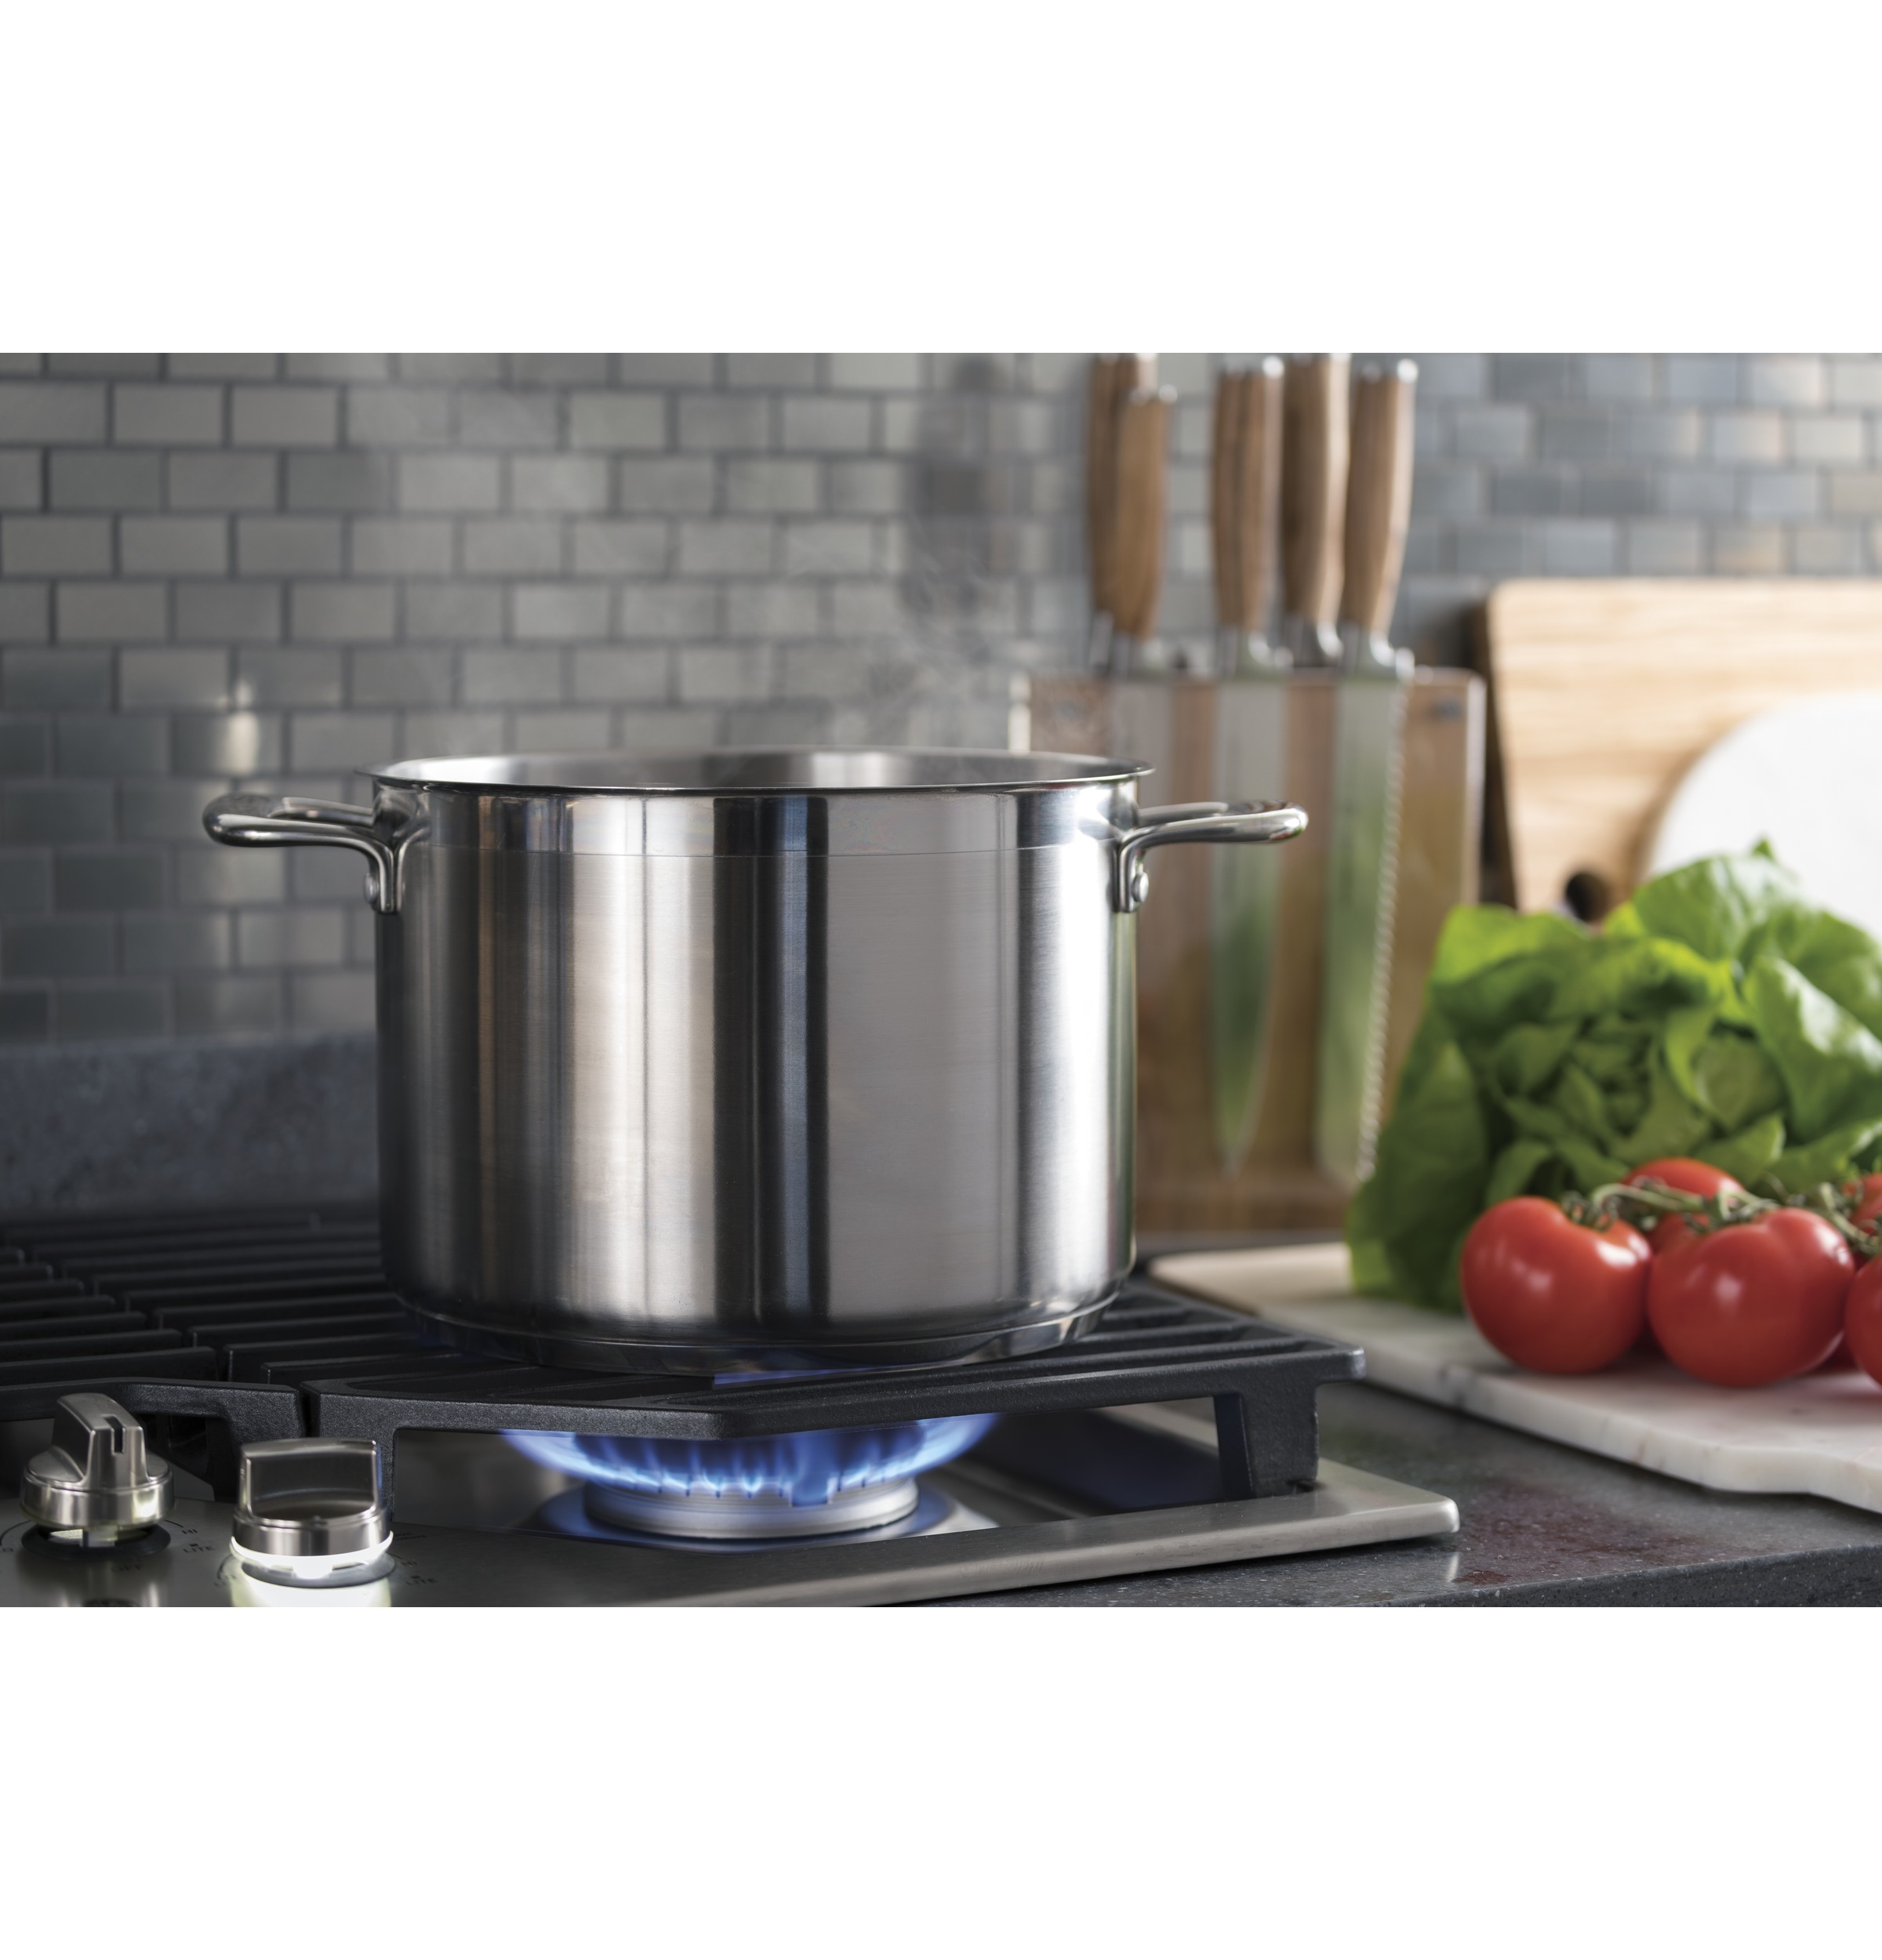 Start Cooking Faster with Power Boil